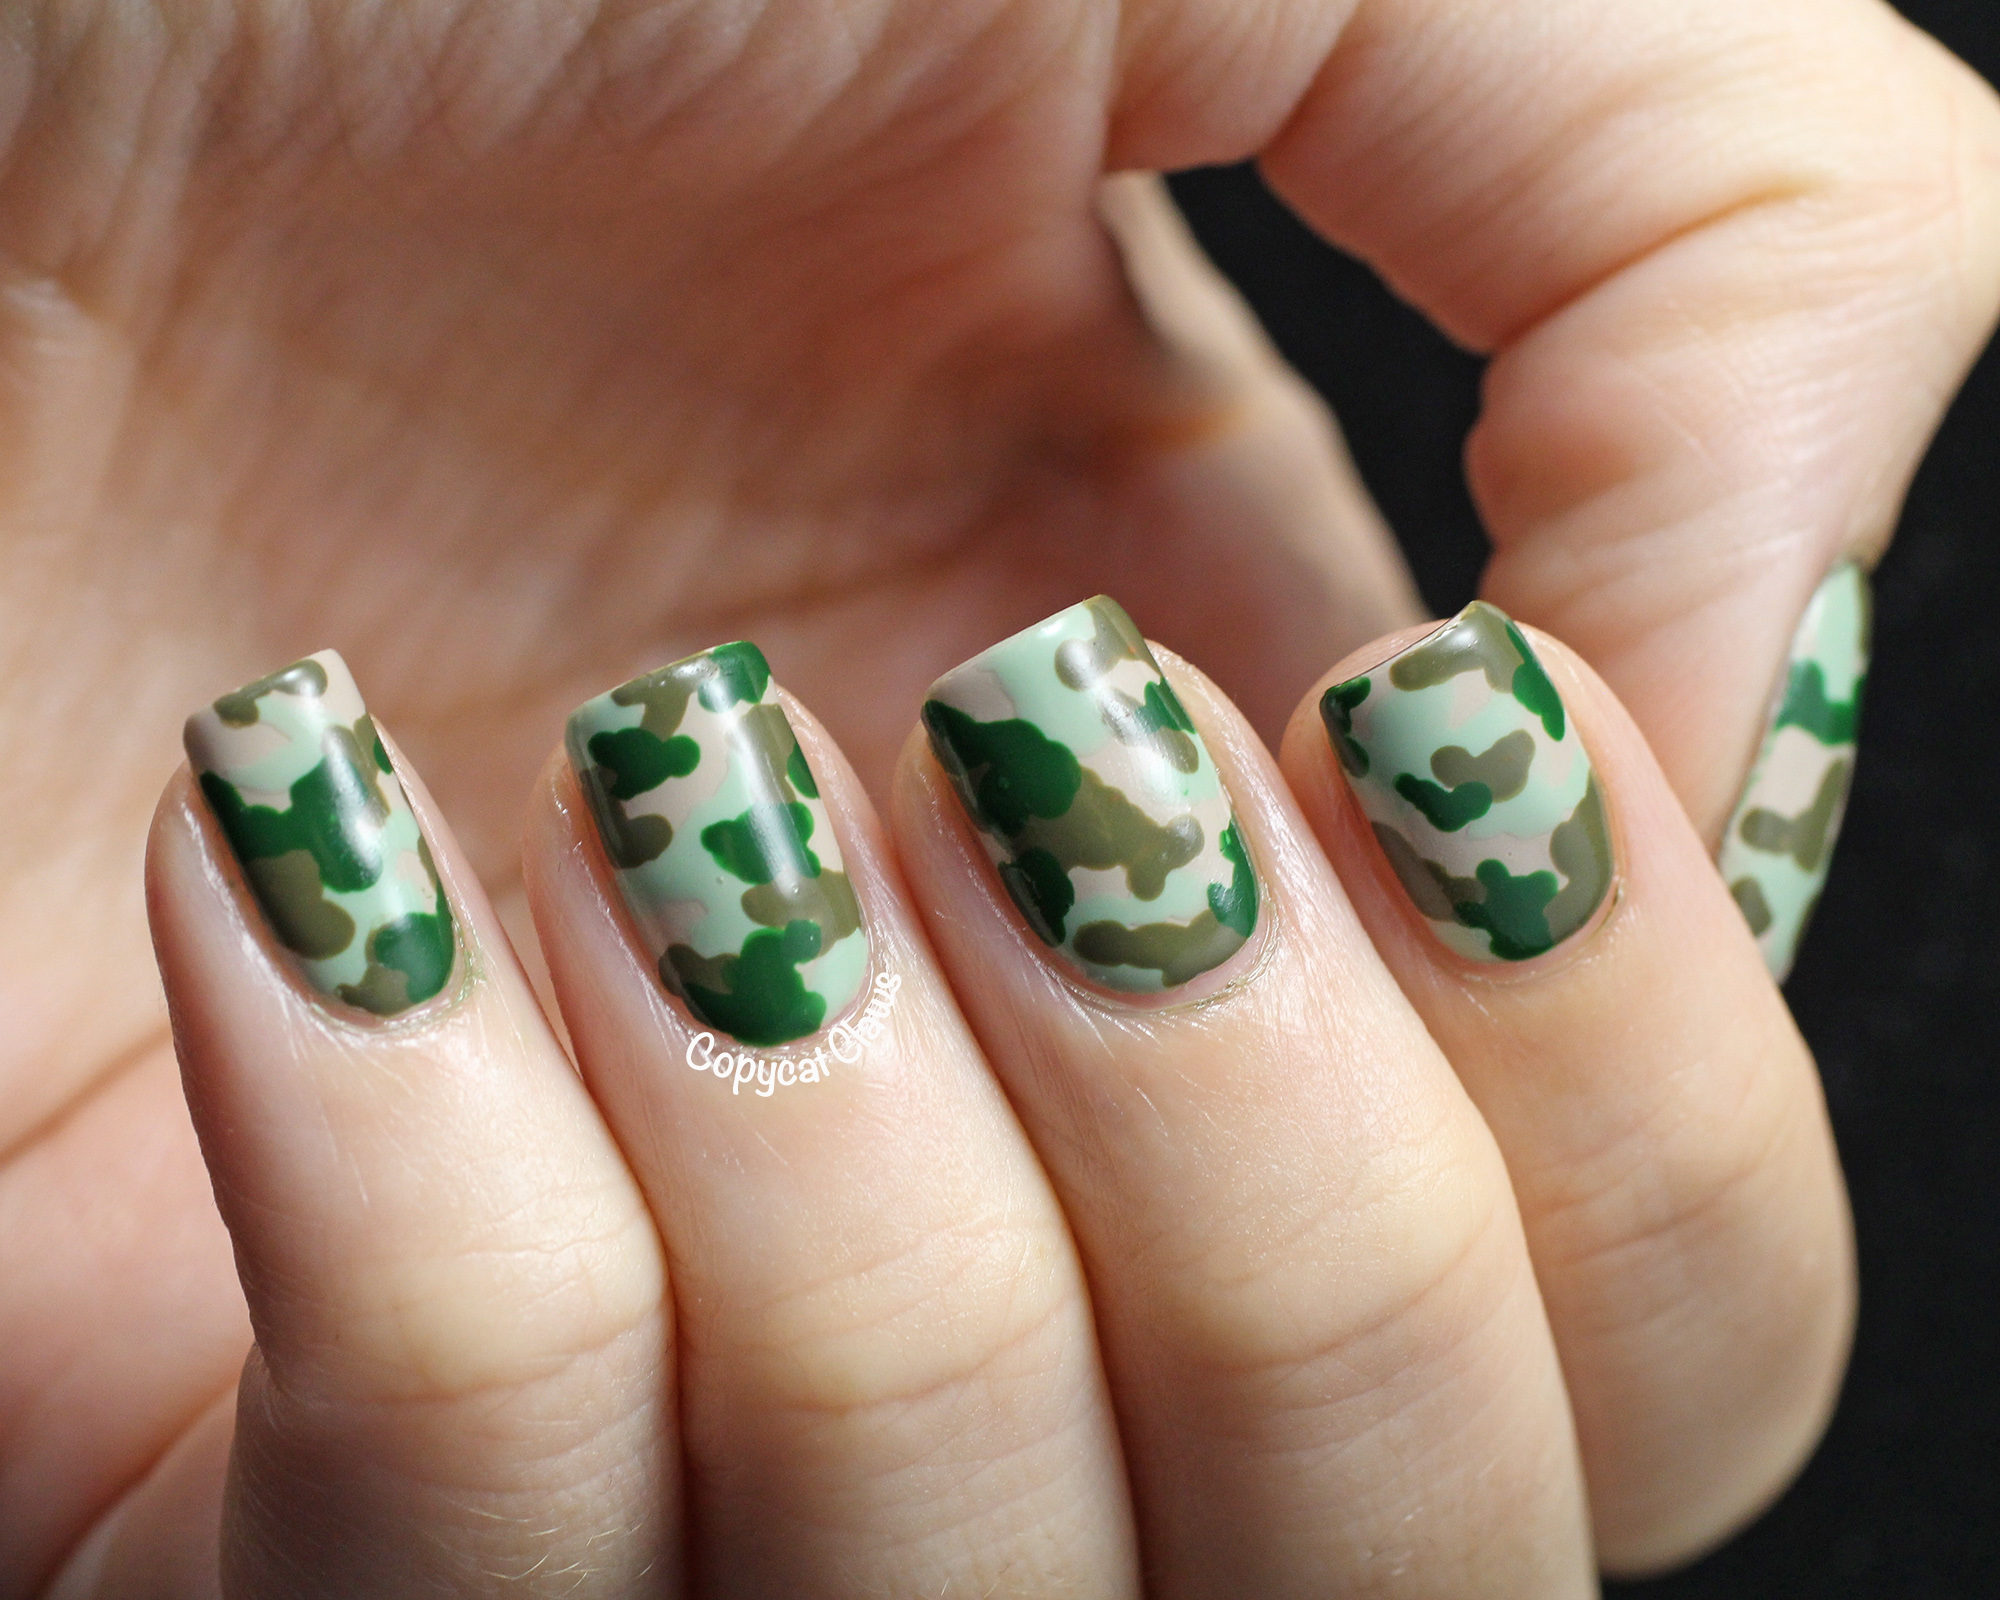 10. Camo Nail Designs on Pinterest - wide 2